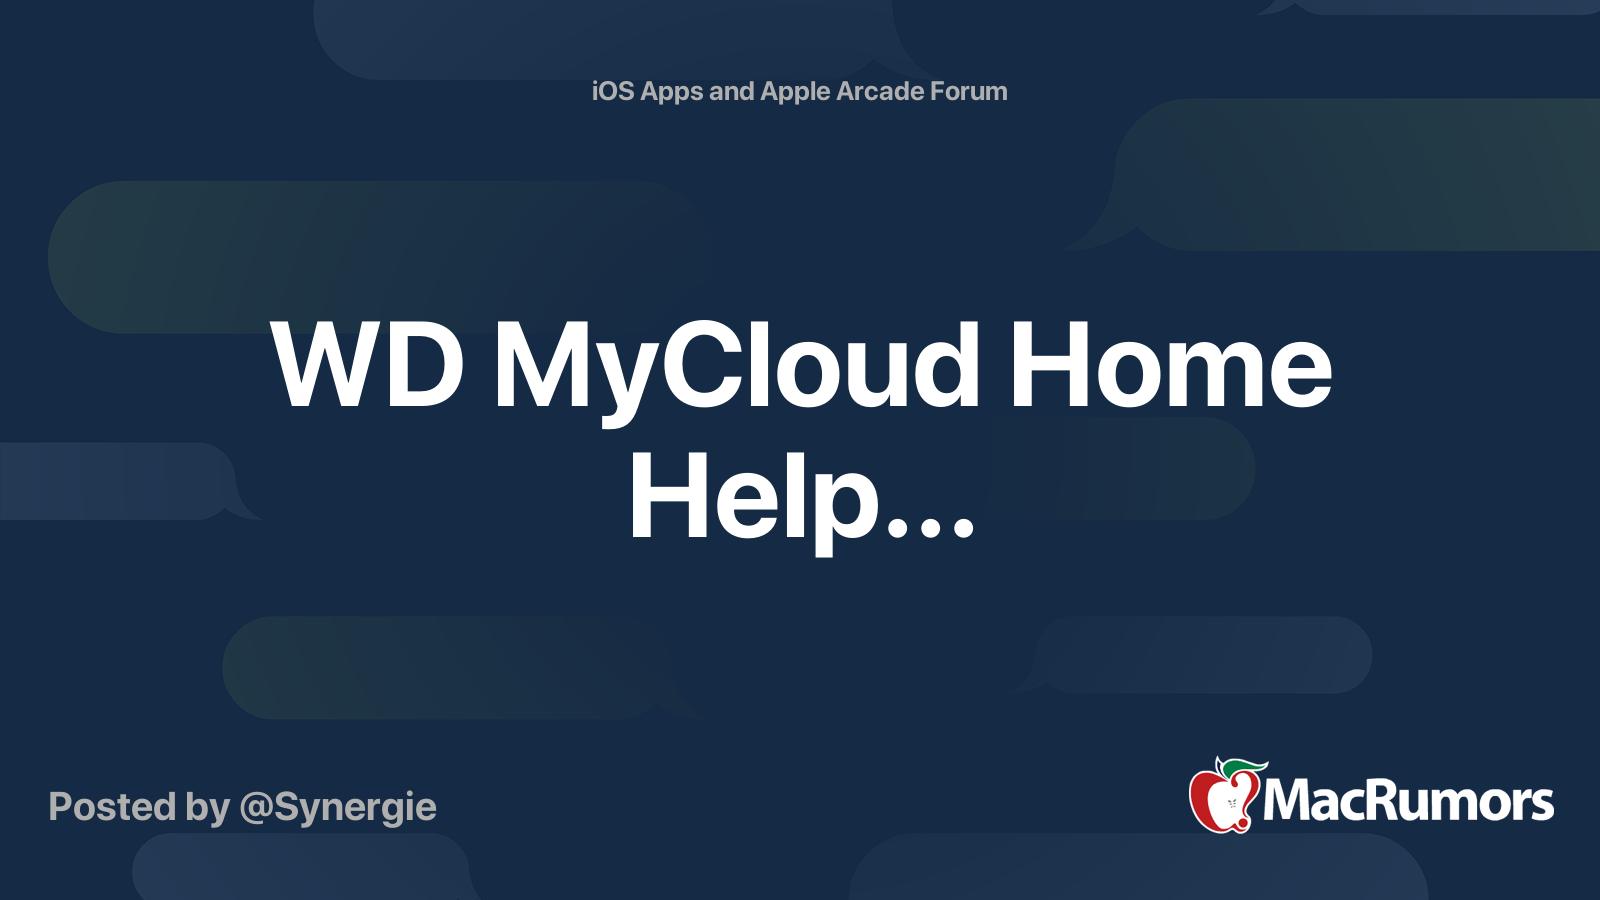 Can't login to MyCloud Home - My Cloud Home - WD Community